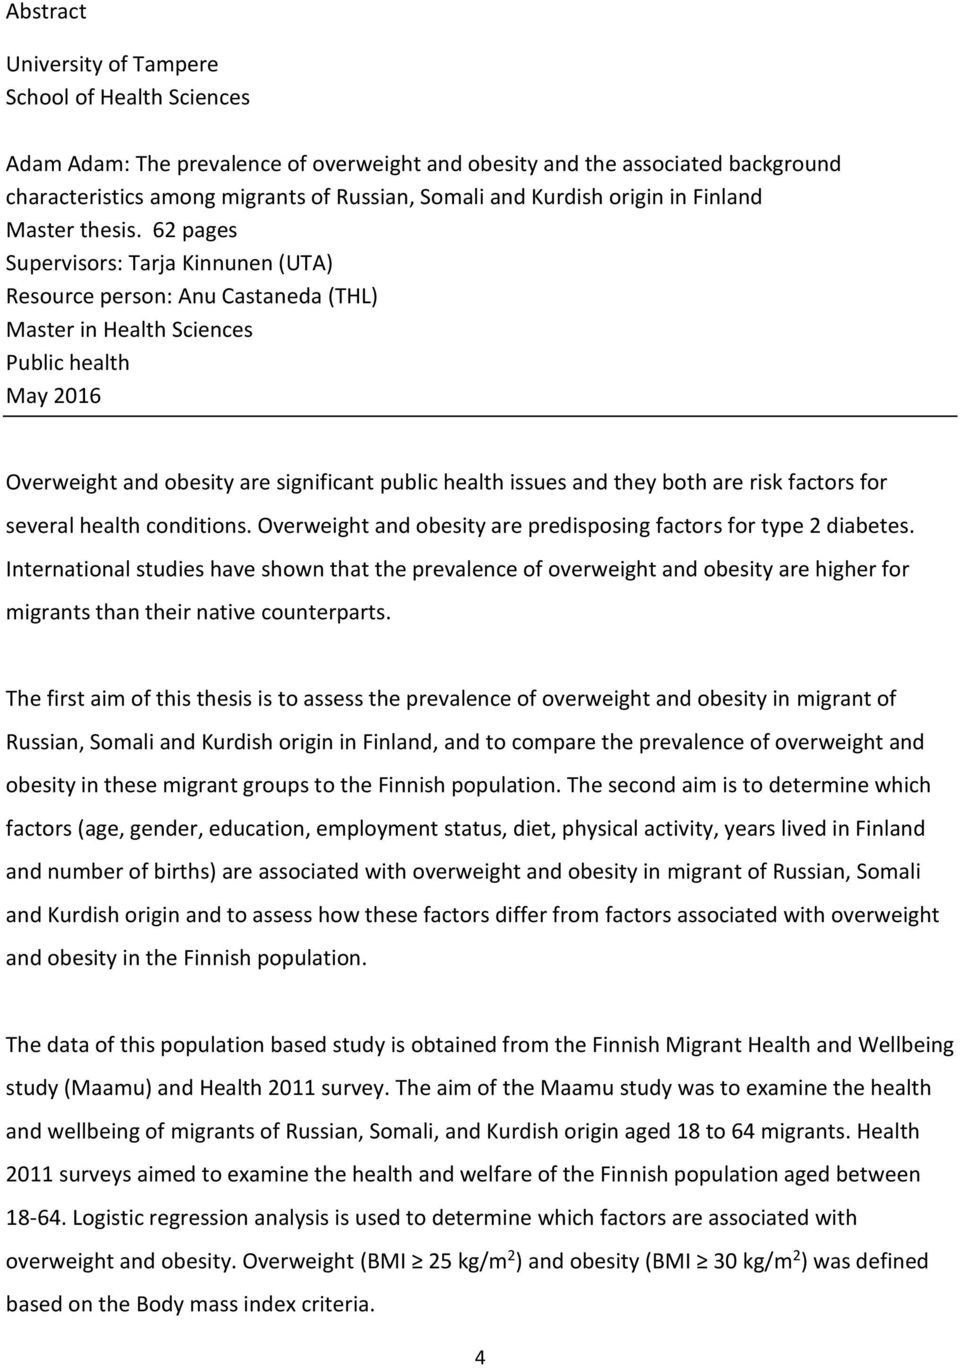 62 pages Supervisors: Tarja Kinnunen (UTA) Resource person: Anu Castaneda (THL) Master in Health Sciences Public health May 2016 Overweight and obesity are significant public health issues and they